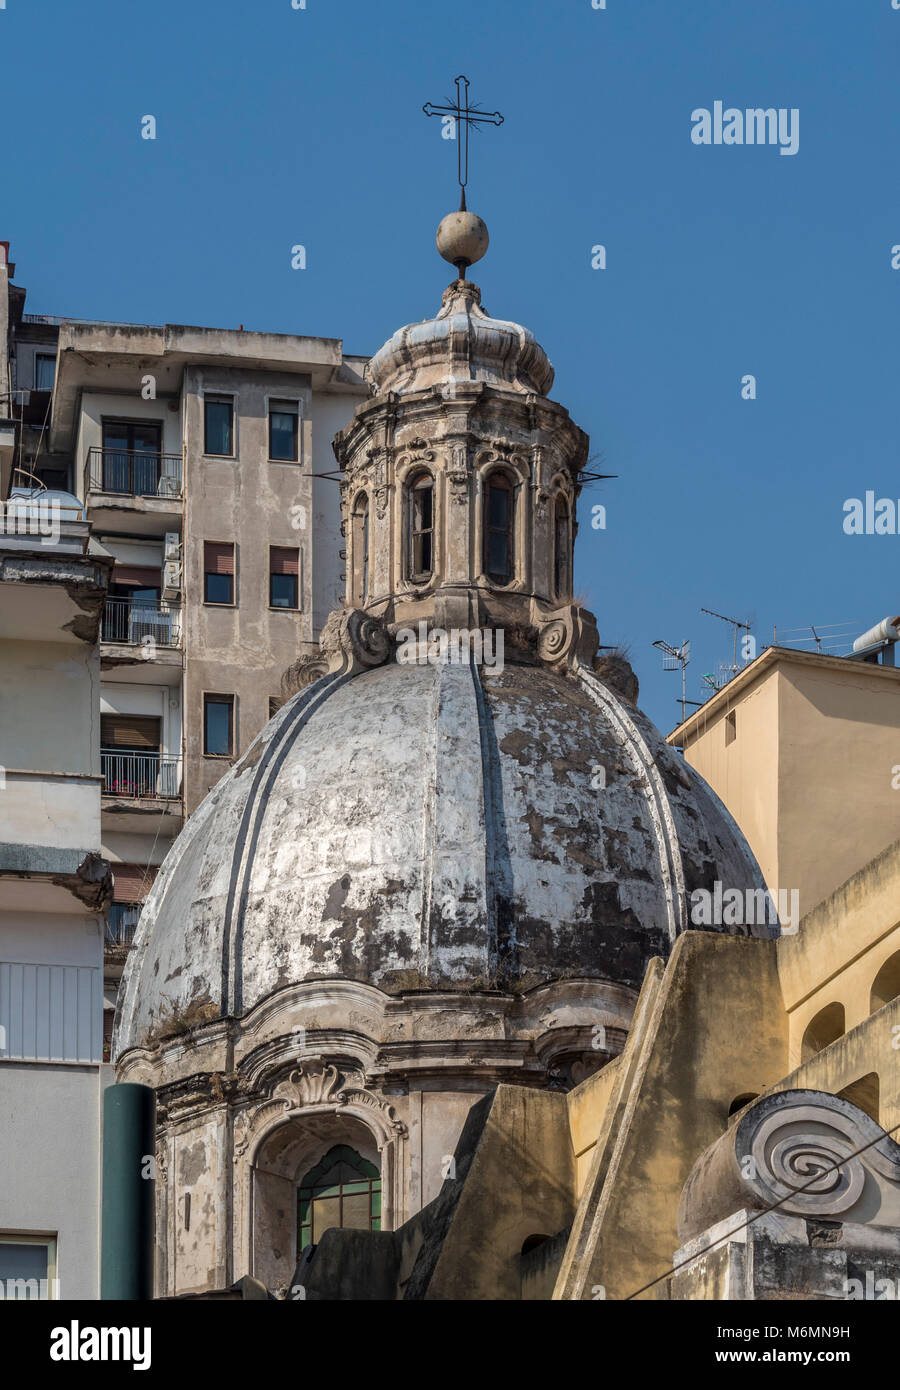 Domed roof on building in Naples, Italy. Stock Photo